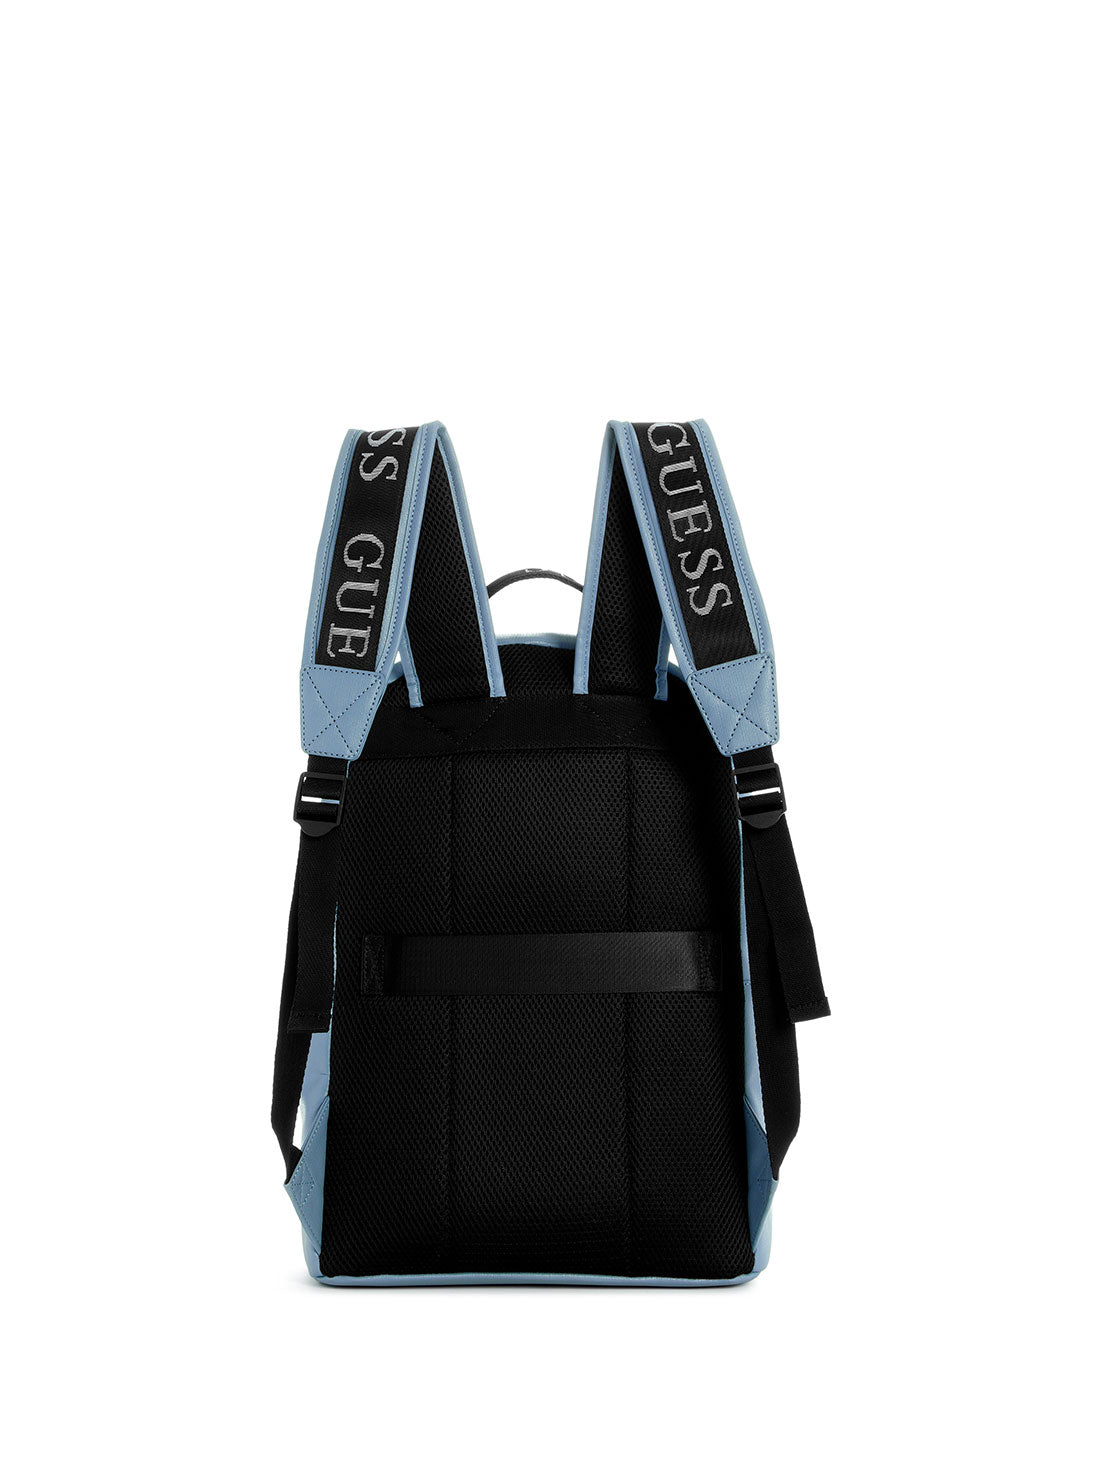 GUESS Blue Logo Outfitter Backpack back view